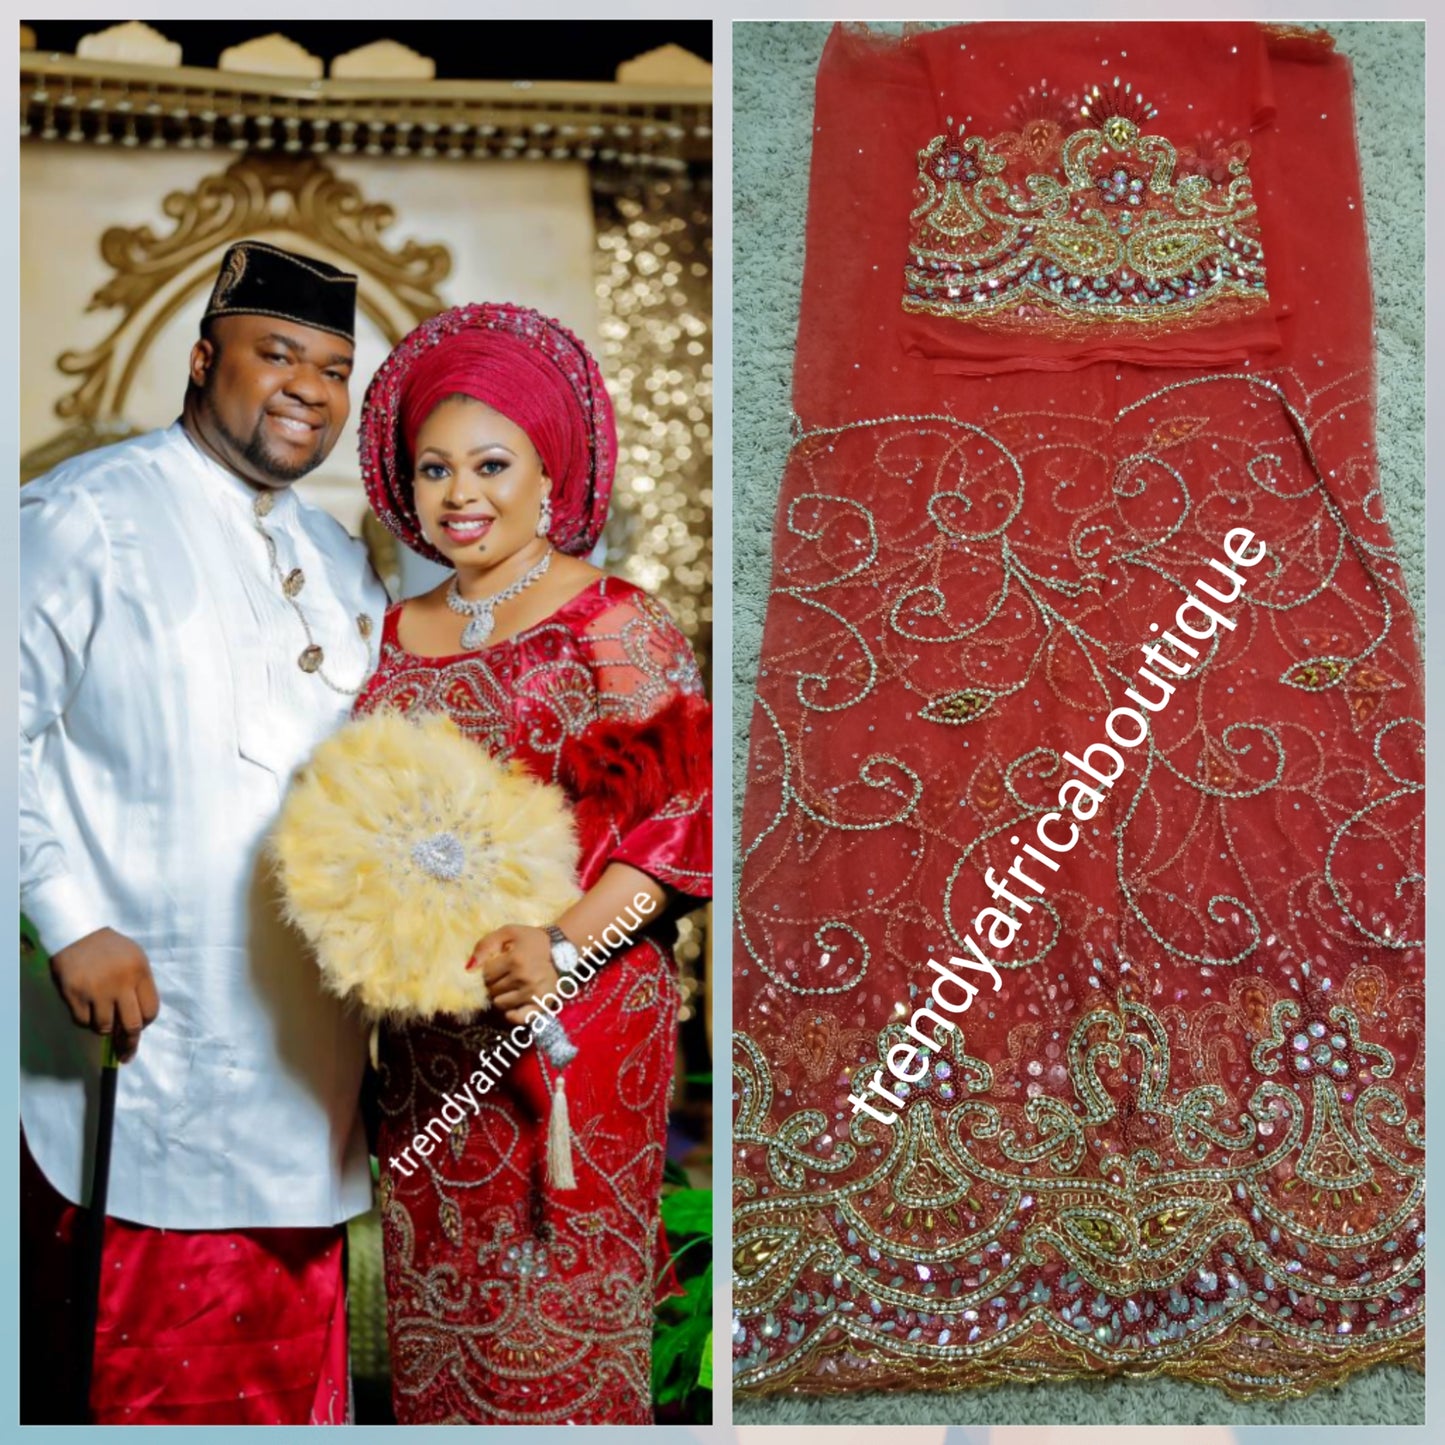 Sale: New arrival Red color VIP Madam Net George wrapper for Nigerian big event. all hand stoned 5yds net + 1.8yds matching blouse George. Sold as a set. Igbo Bridal Net George for traditional wedding